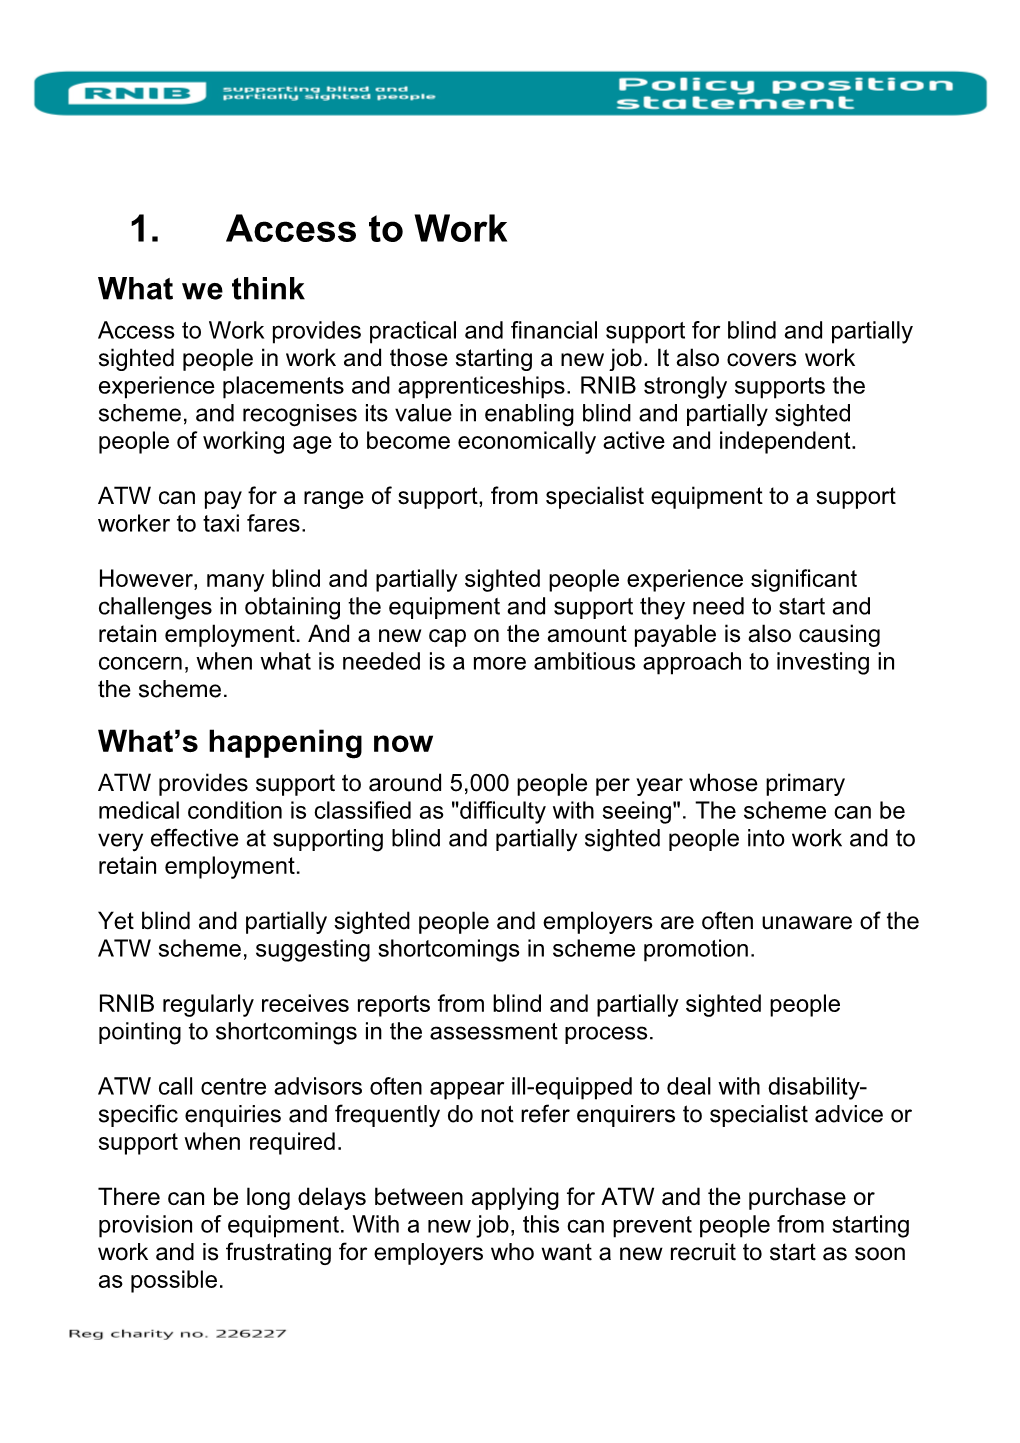 Access to Work